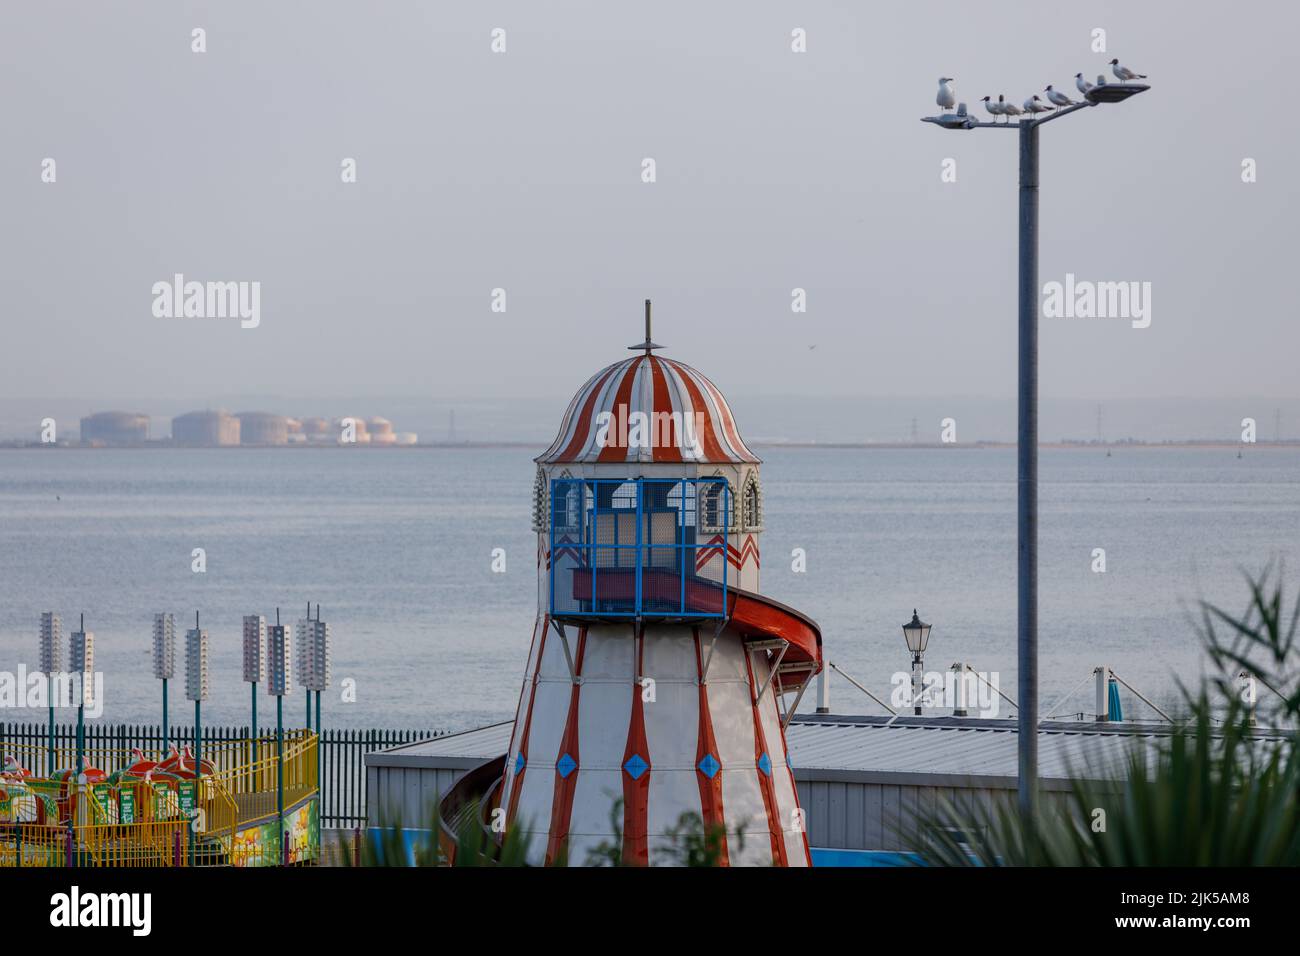 The Helter Skelter Lighthouse Slip at Adventure Island, Southend with Grain LNG terminal Kent in the background, across the River Thames Stock Photo